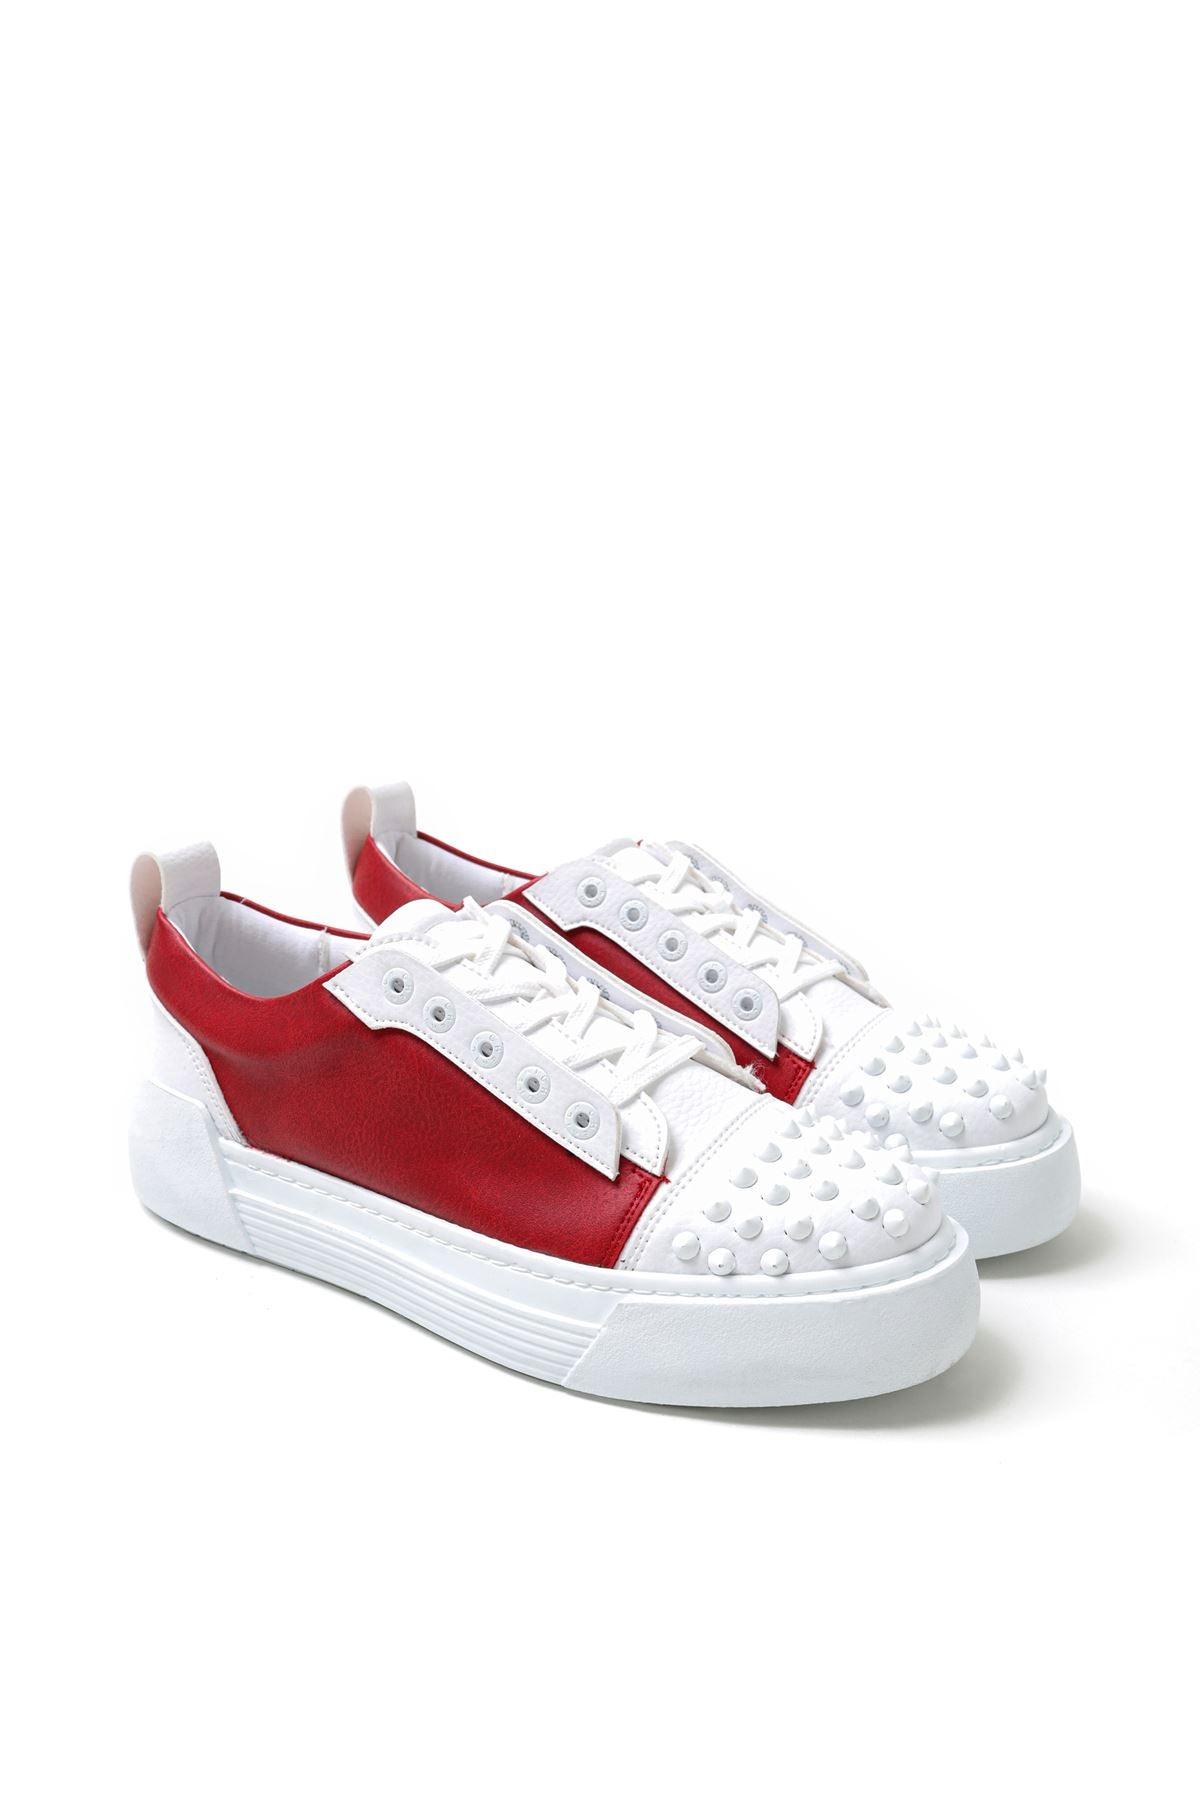 CH169 BT Men's Shoes WHITE / RED - STREET MODE ™